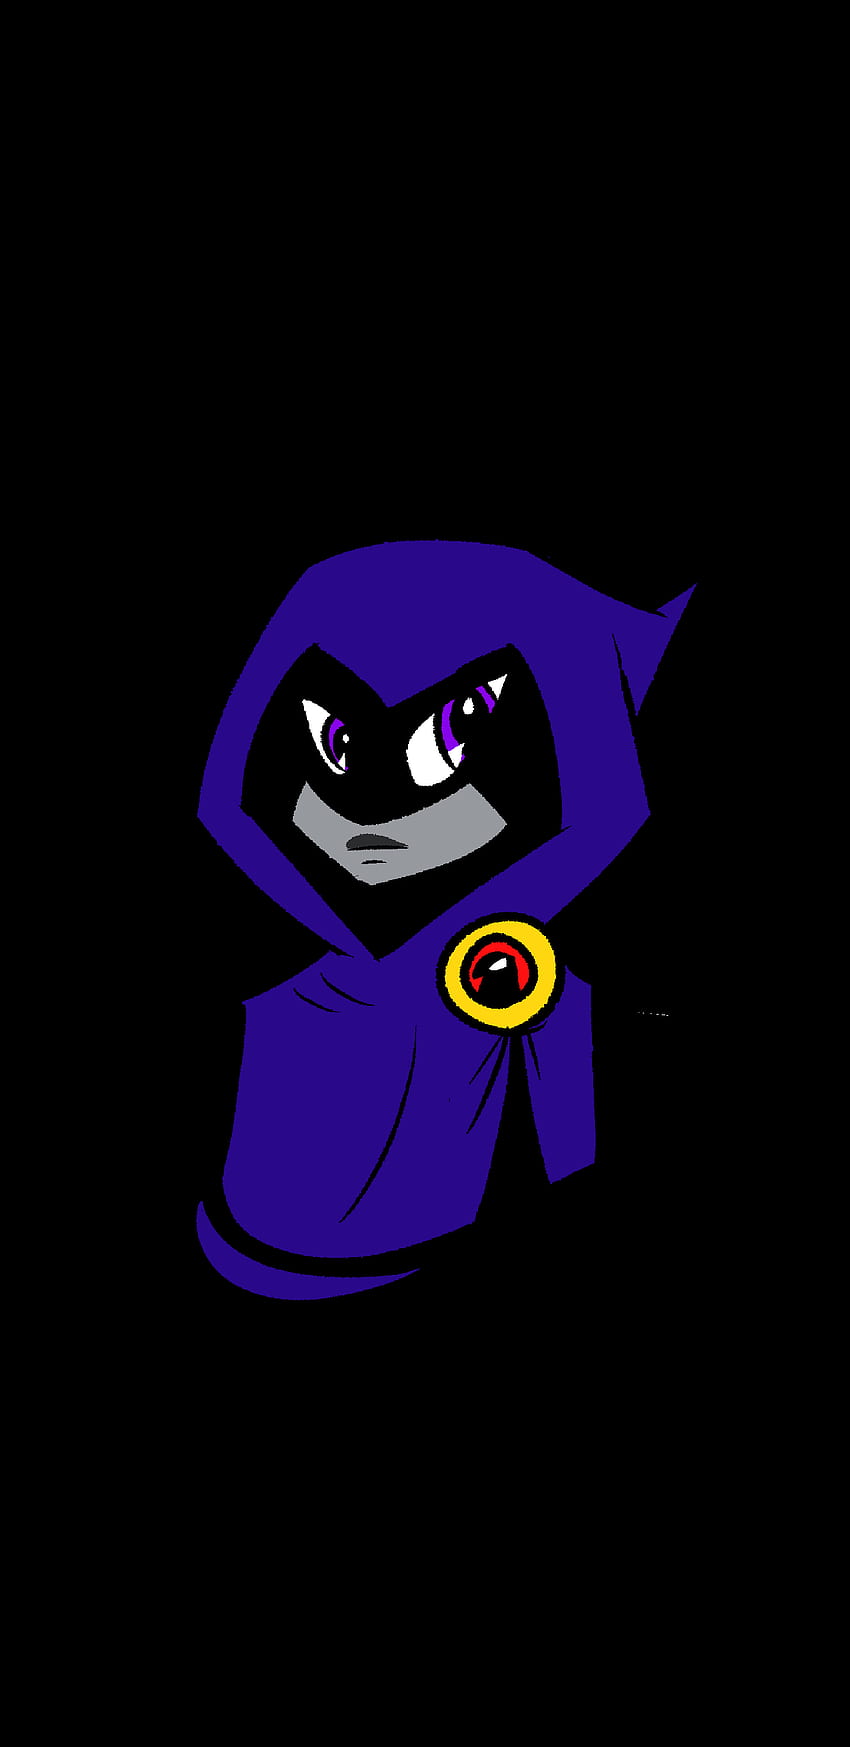 I couldn't find any AMOLED phone of Raven, so I made my own. to use. : teentitans HD phone wallpaper